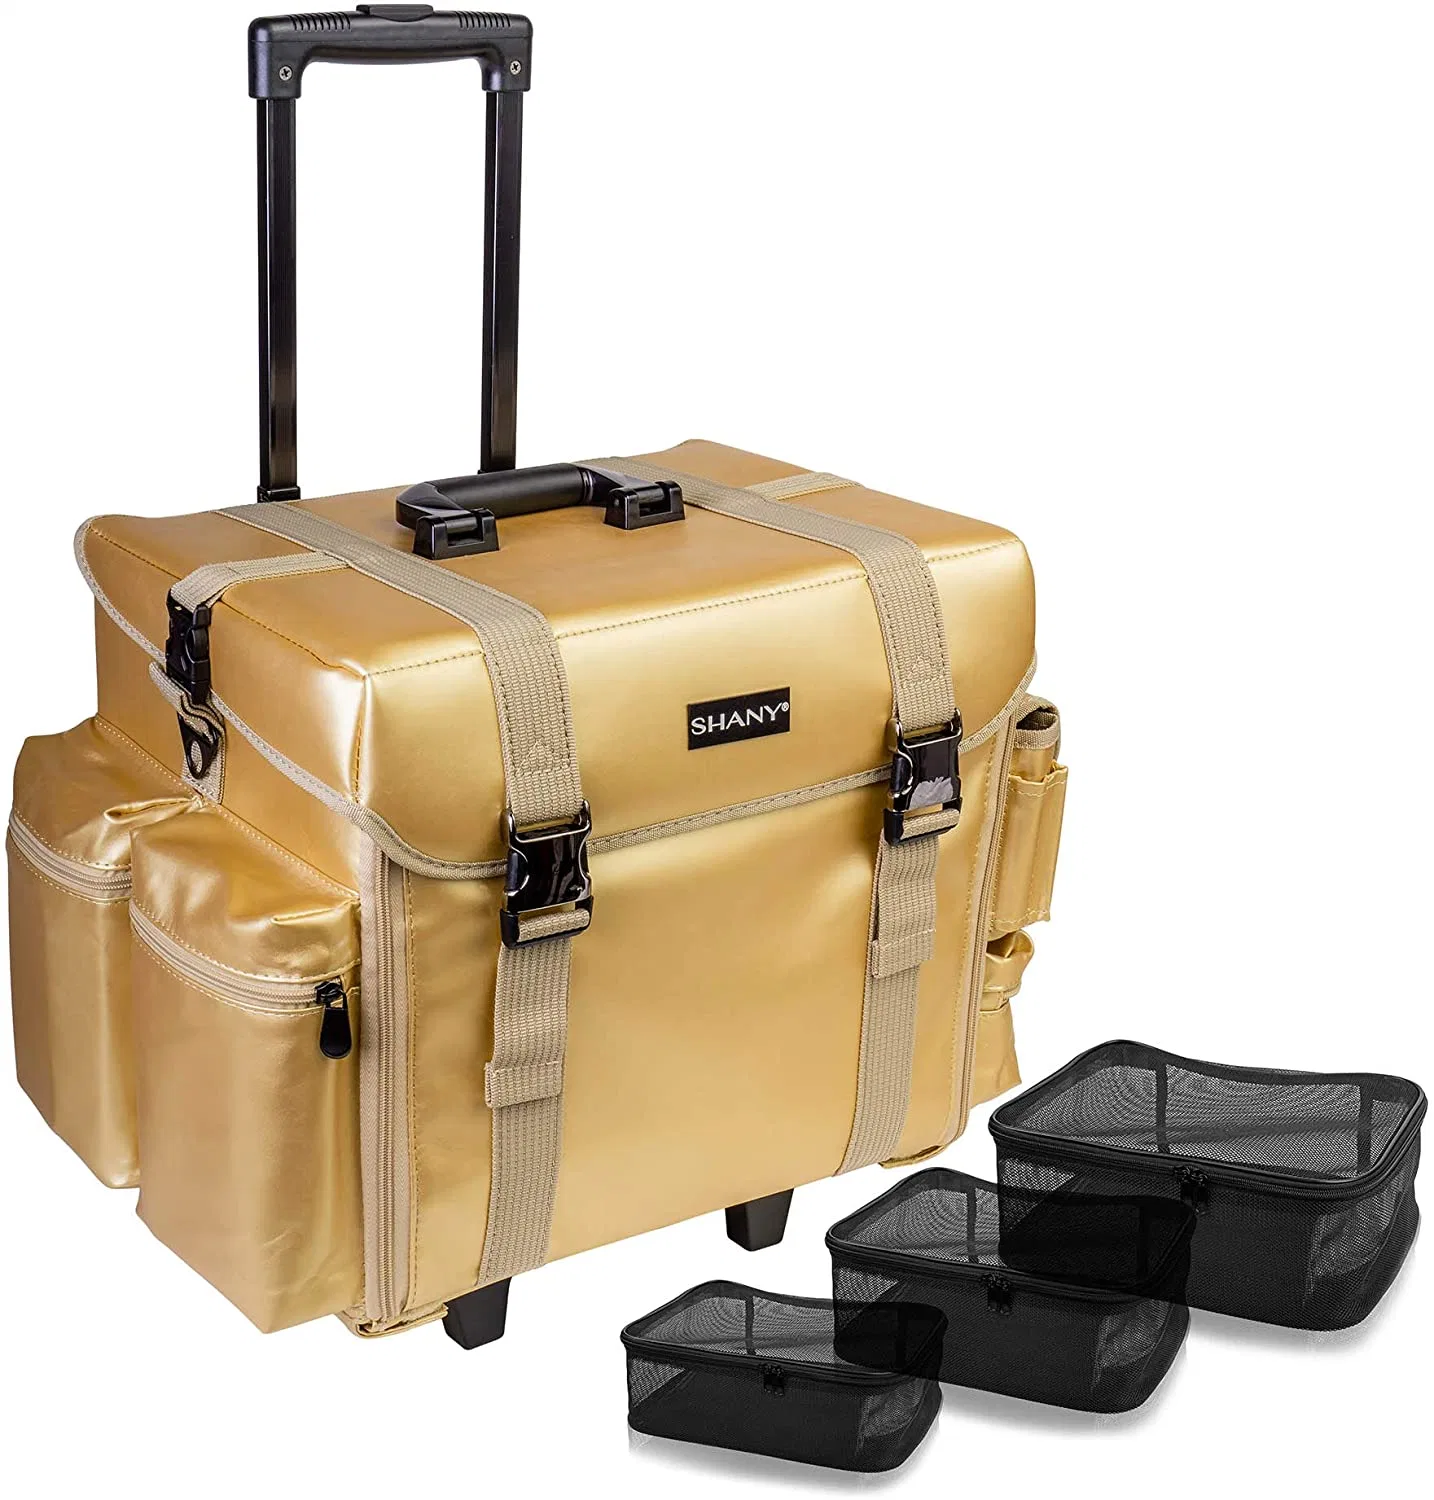 Makeup Artist Soft Rolling Trolley Cosmetic Case with Free Set of Mesh Bags